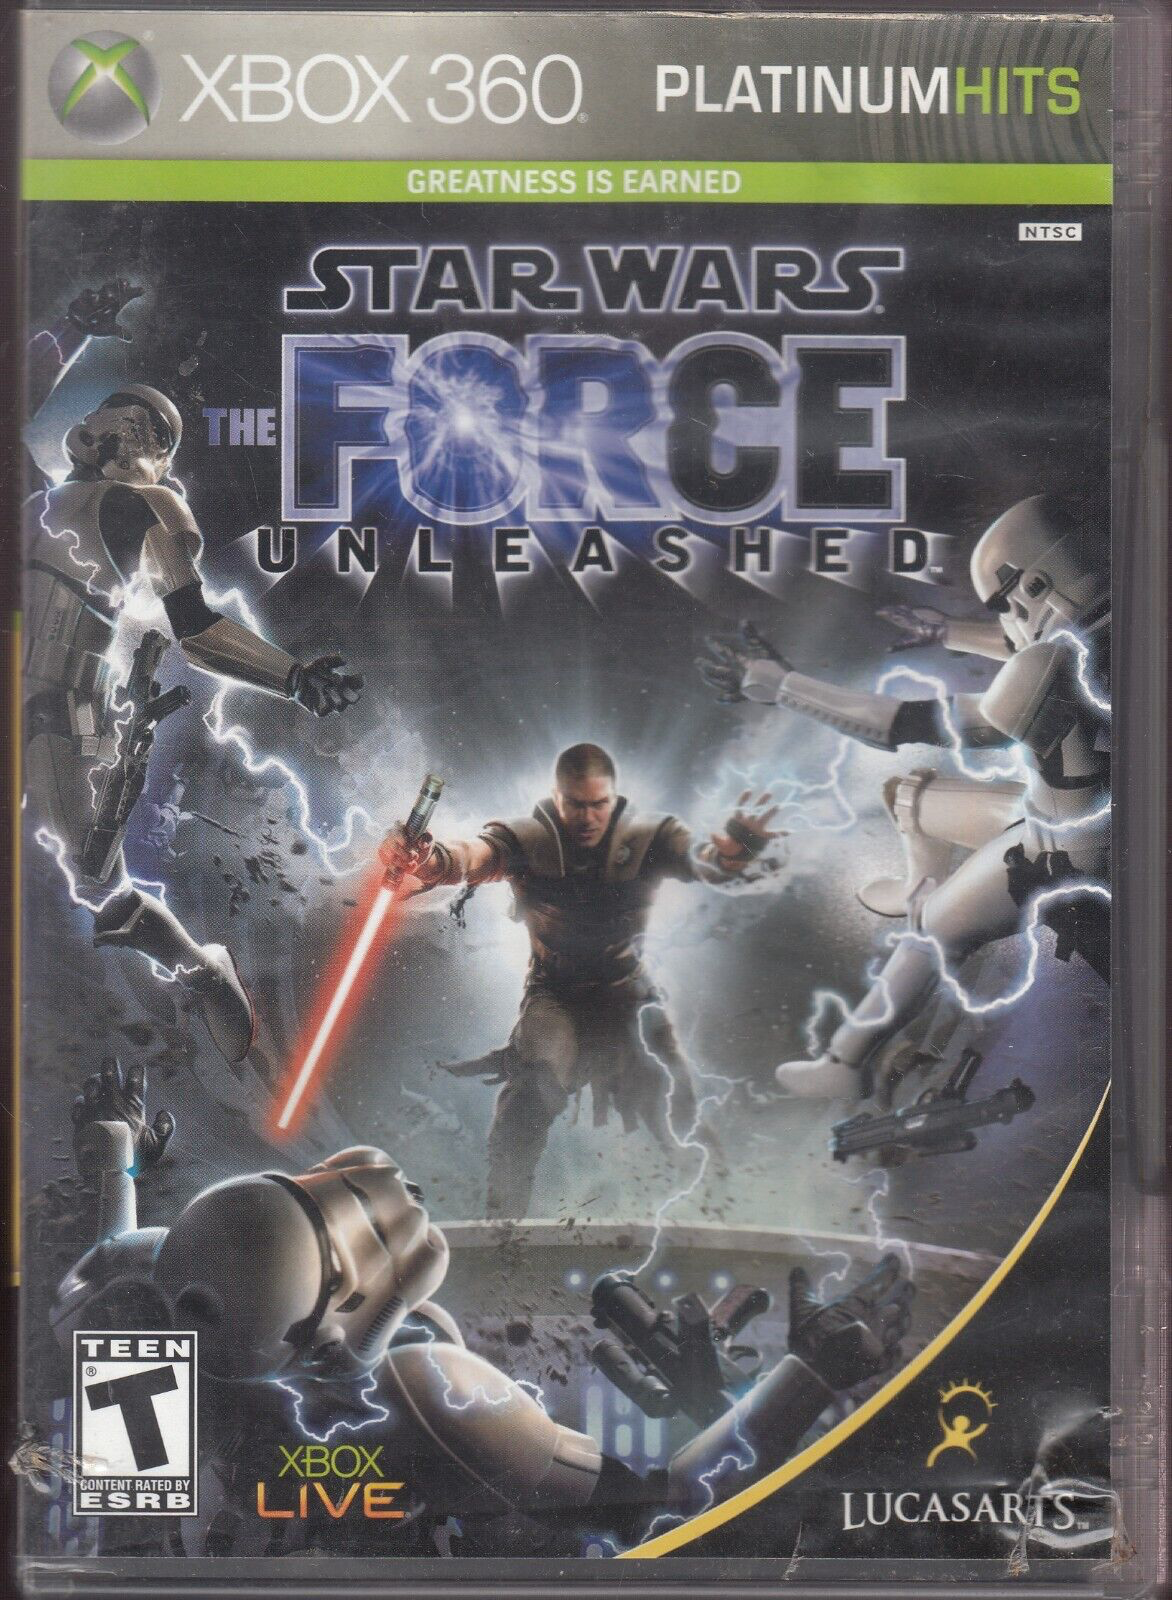 Star Wars: The Force Unleashed - Platinum Hits - Xbox 360